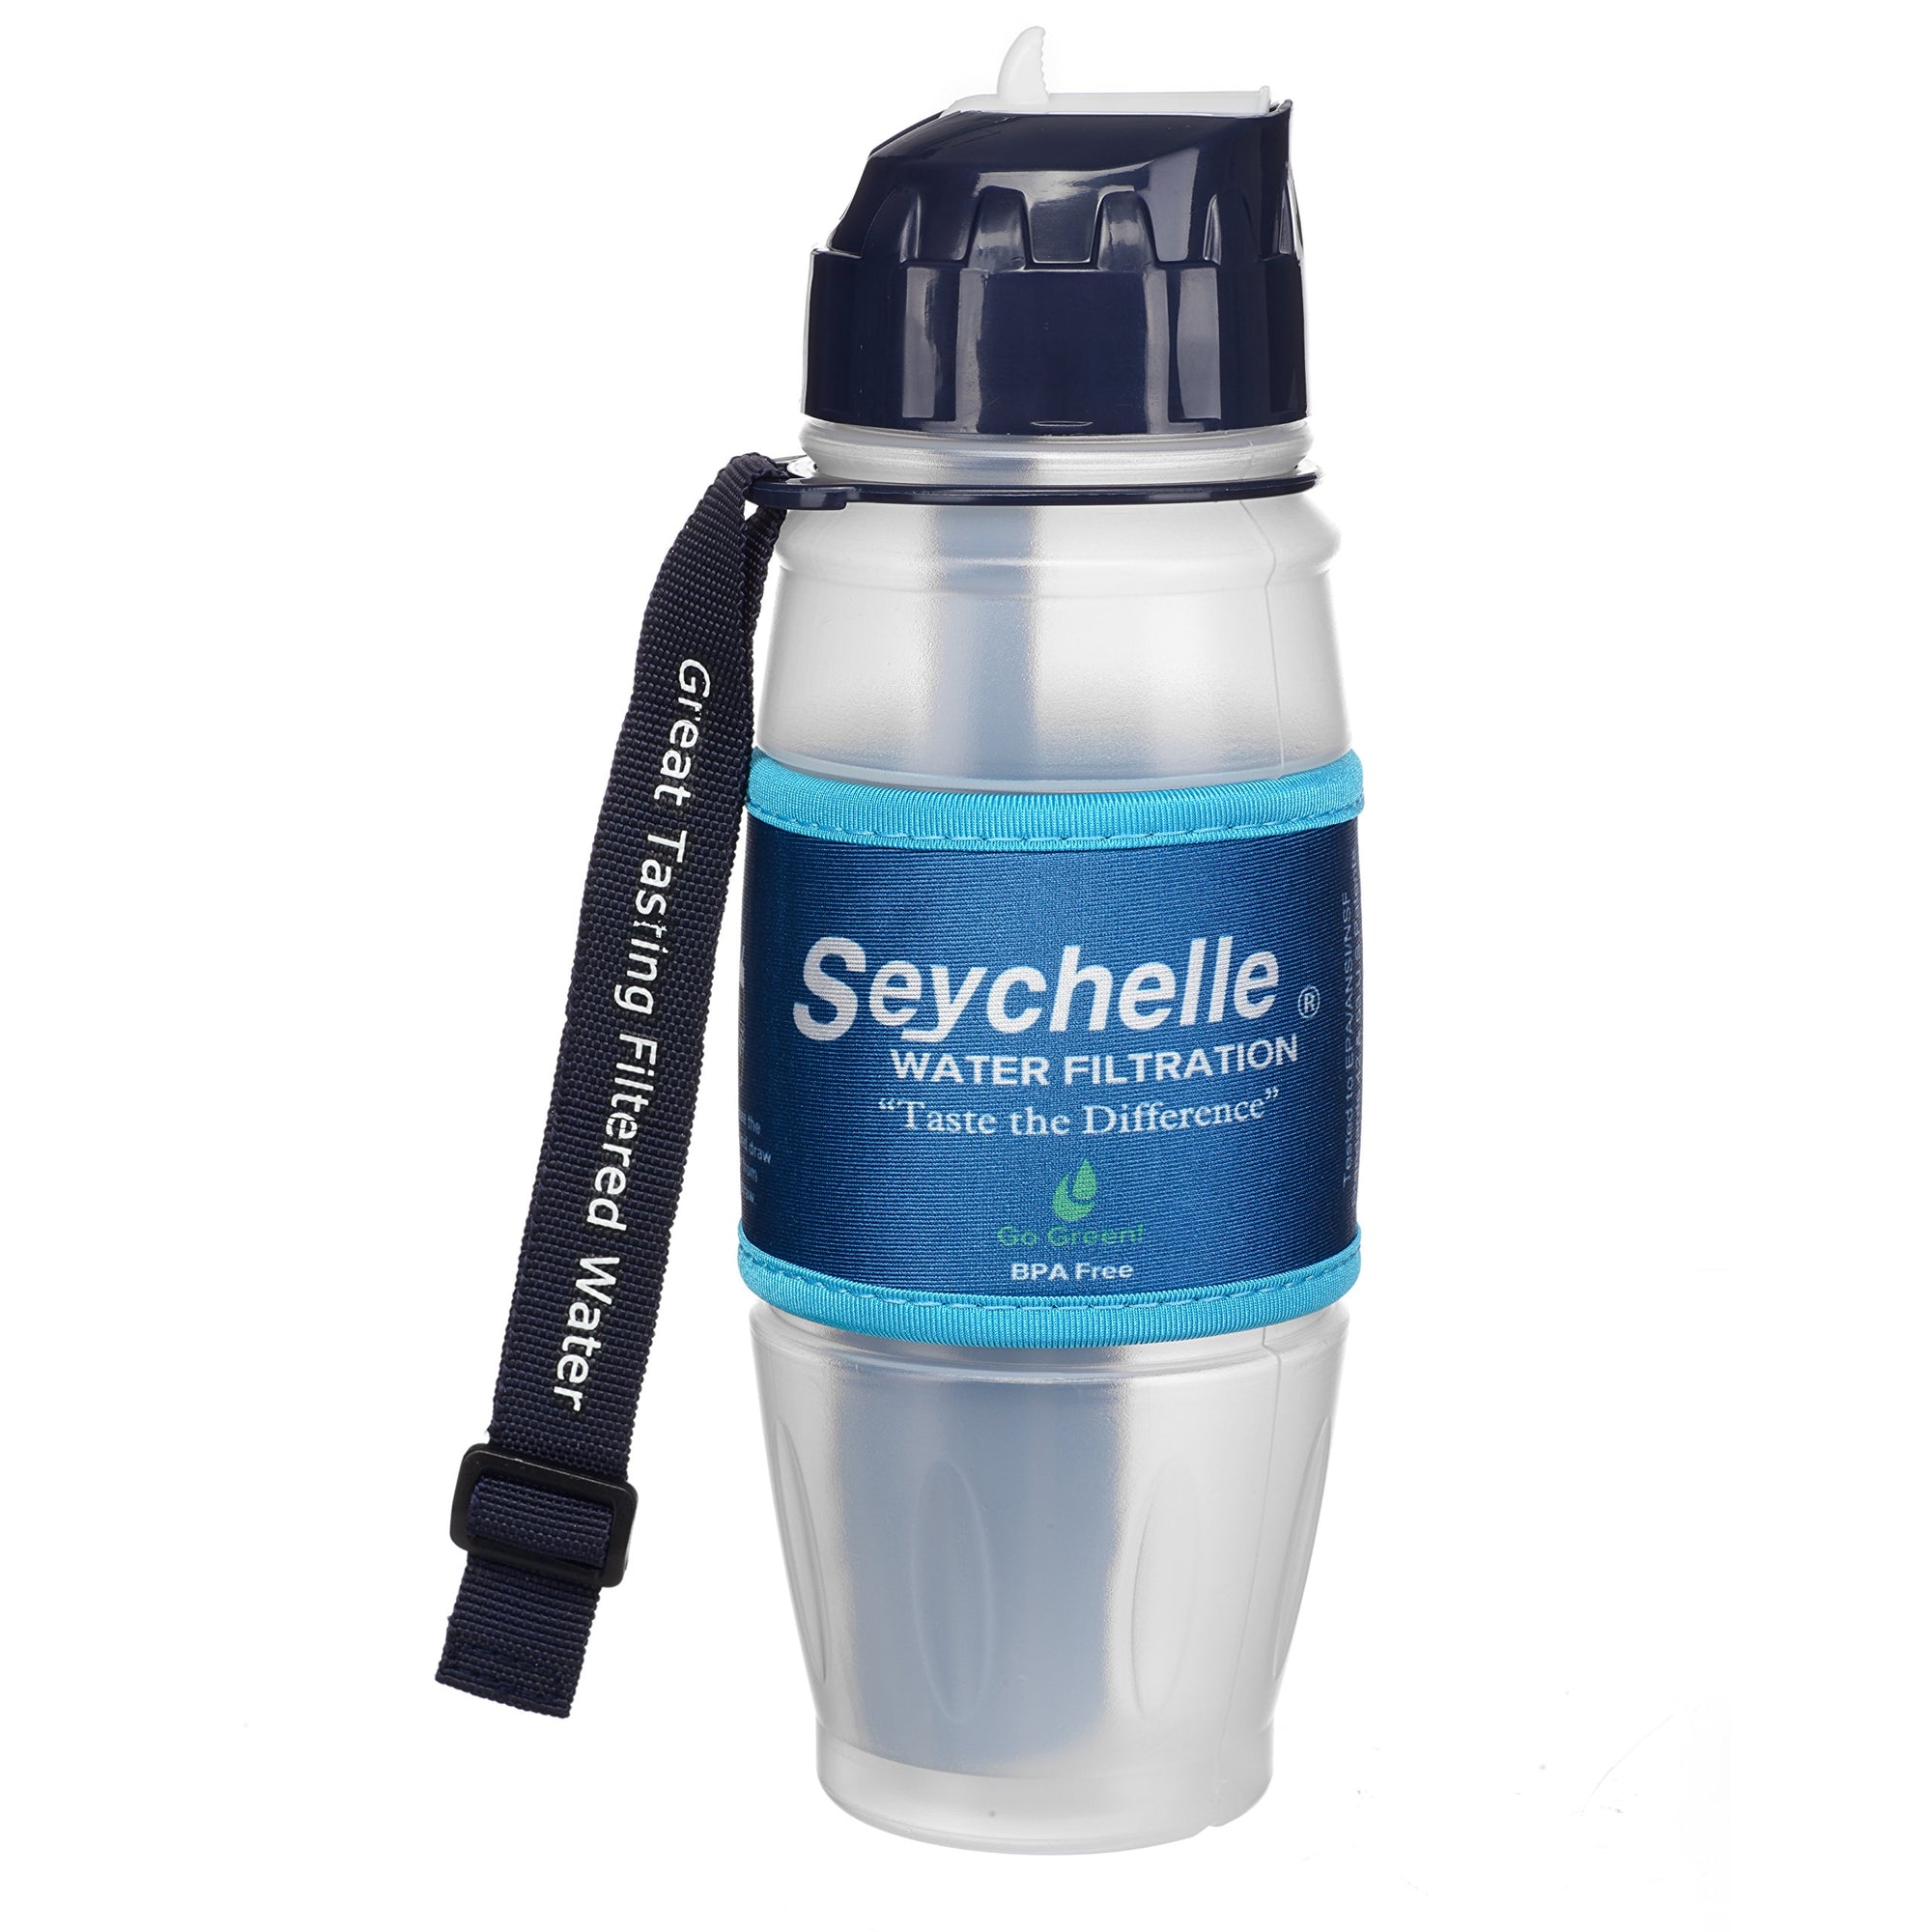 Seychelle Extreme Water Filter Bottle - Camping, Travel, Hiking, Backpacking, Survival and Emergency - Removes Bacteria, Viruses, Radiological Contaminants - 28 oz